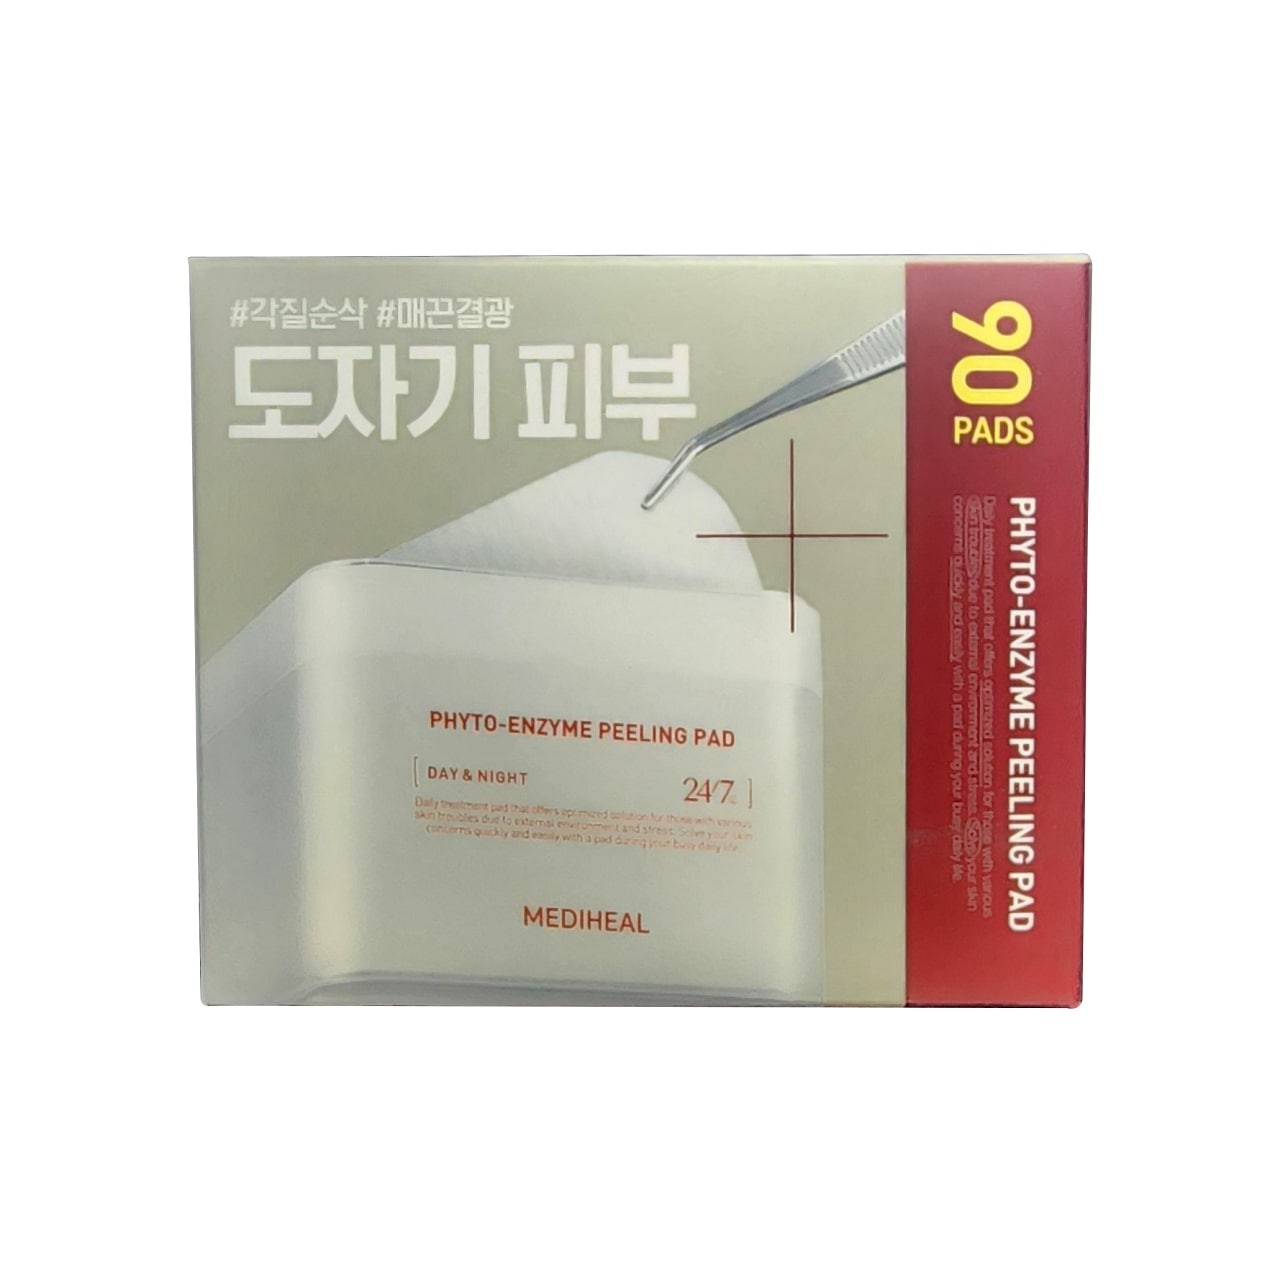 Product label for Mediheal Phyto-enzyme Peeling Pads (90 count)